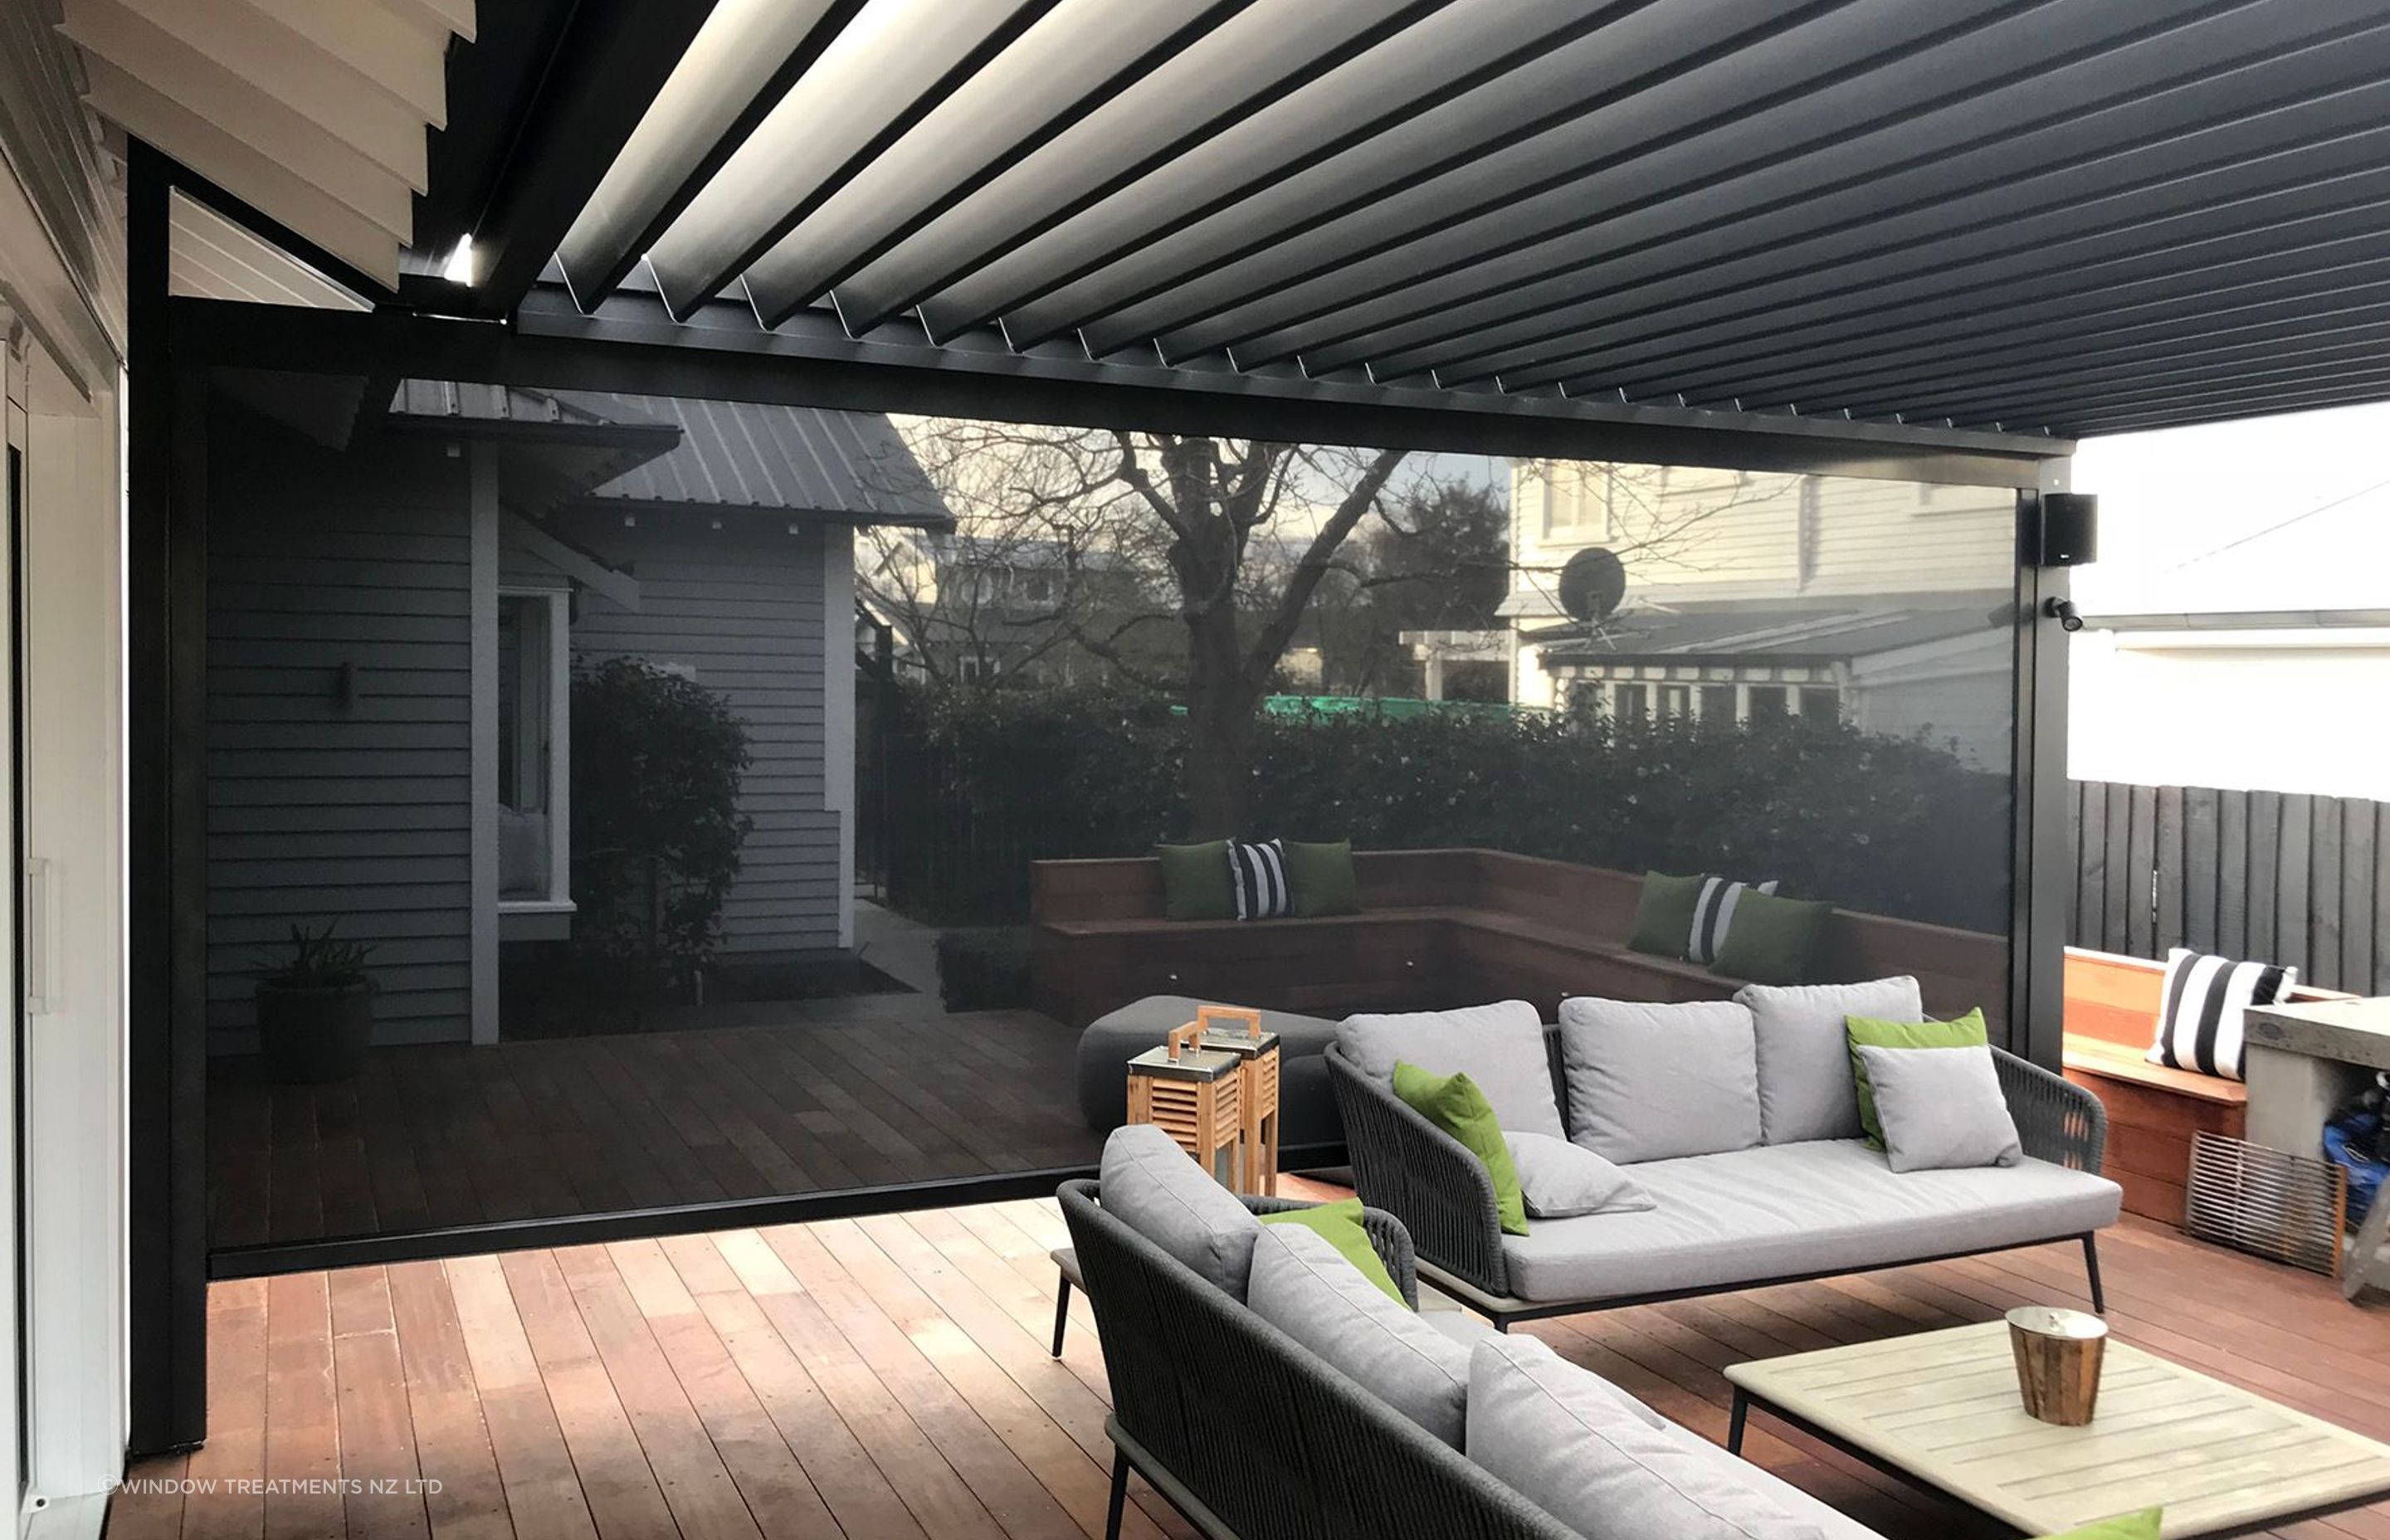 Motorised options like Securo® Max Roller Blind add superior convenience and more to an outdoor living space